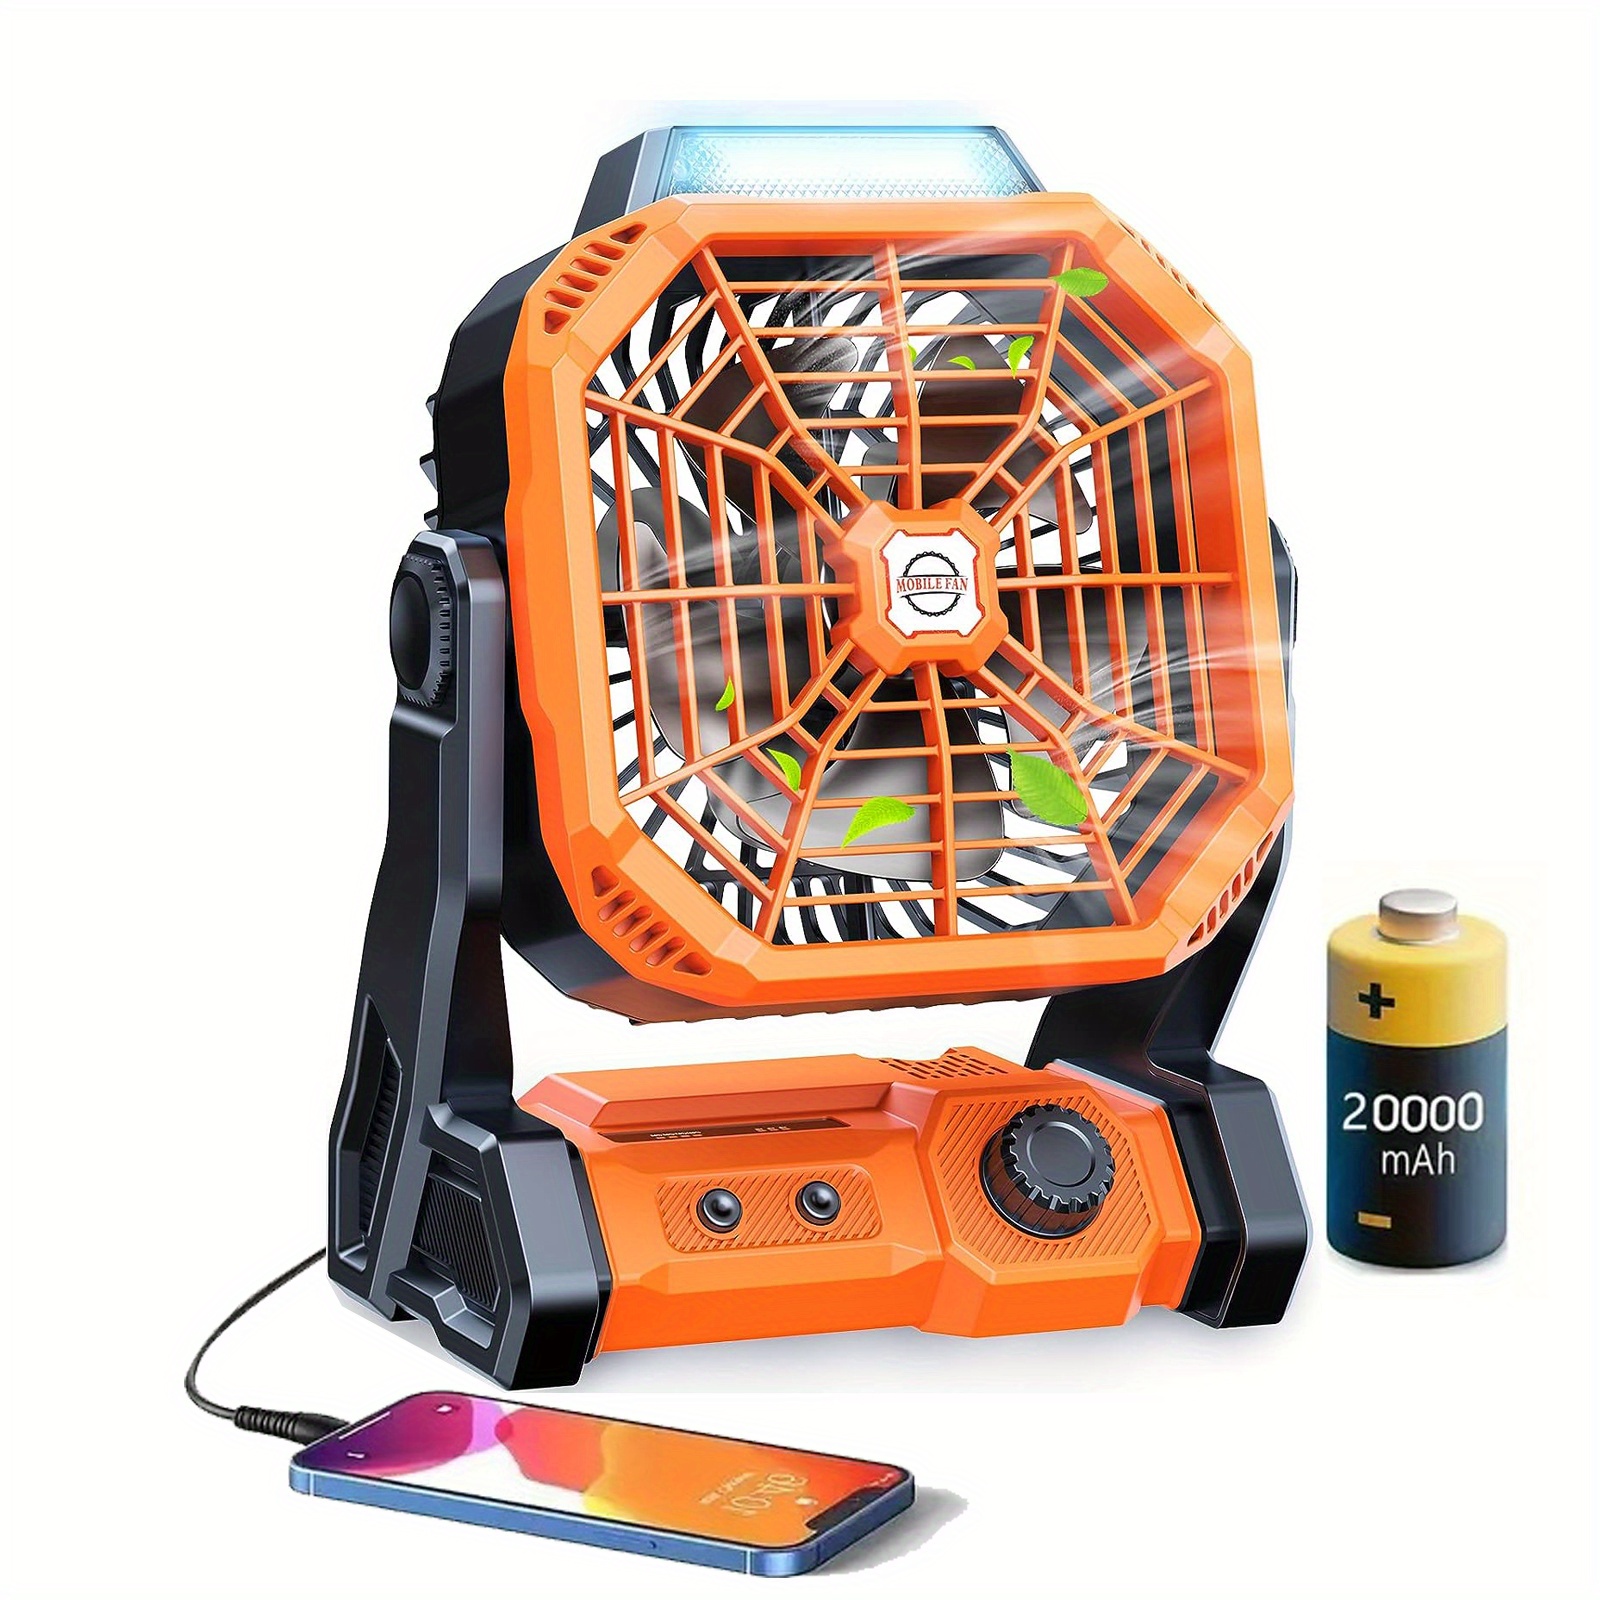 Camping fan with LED light, three wind speeds - KENTFAITH